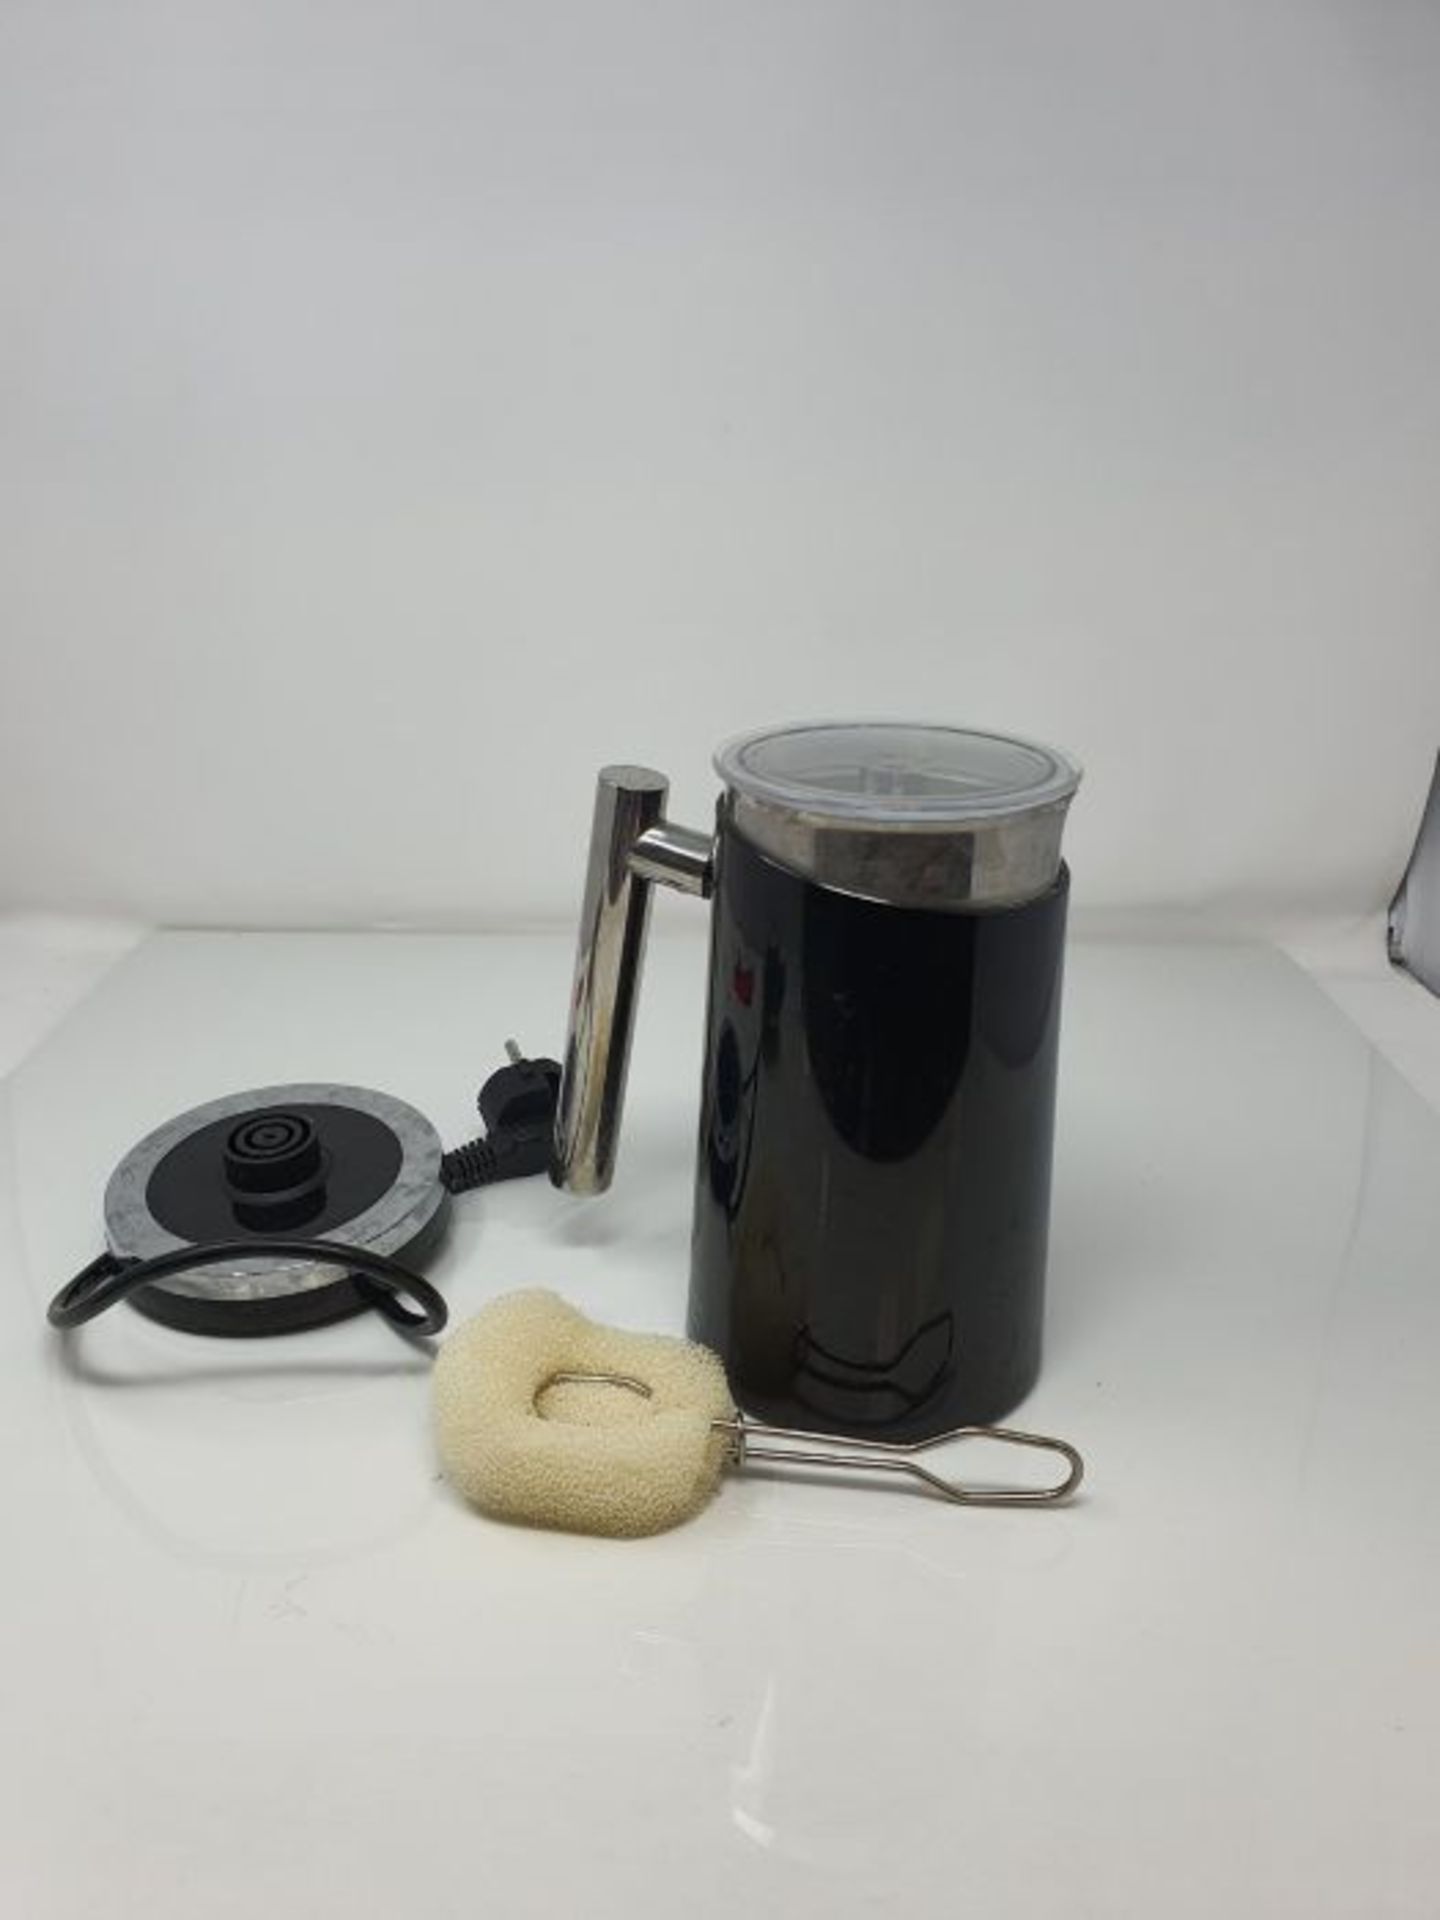 Milk Frother 300 ml, 500 W Electric Milk Frother, Stainless Steel Automatic Milk Froth - Image 3 of 3